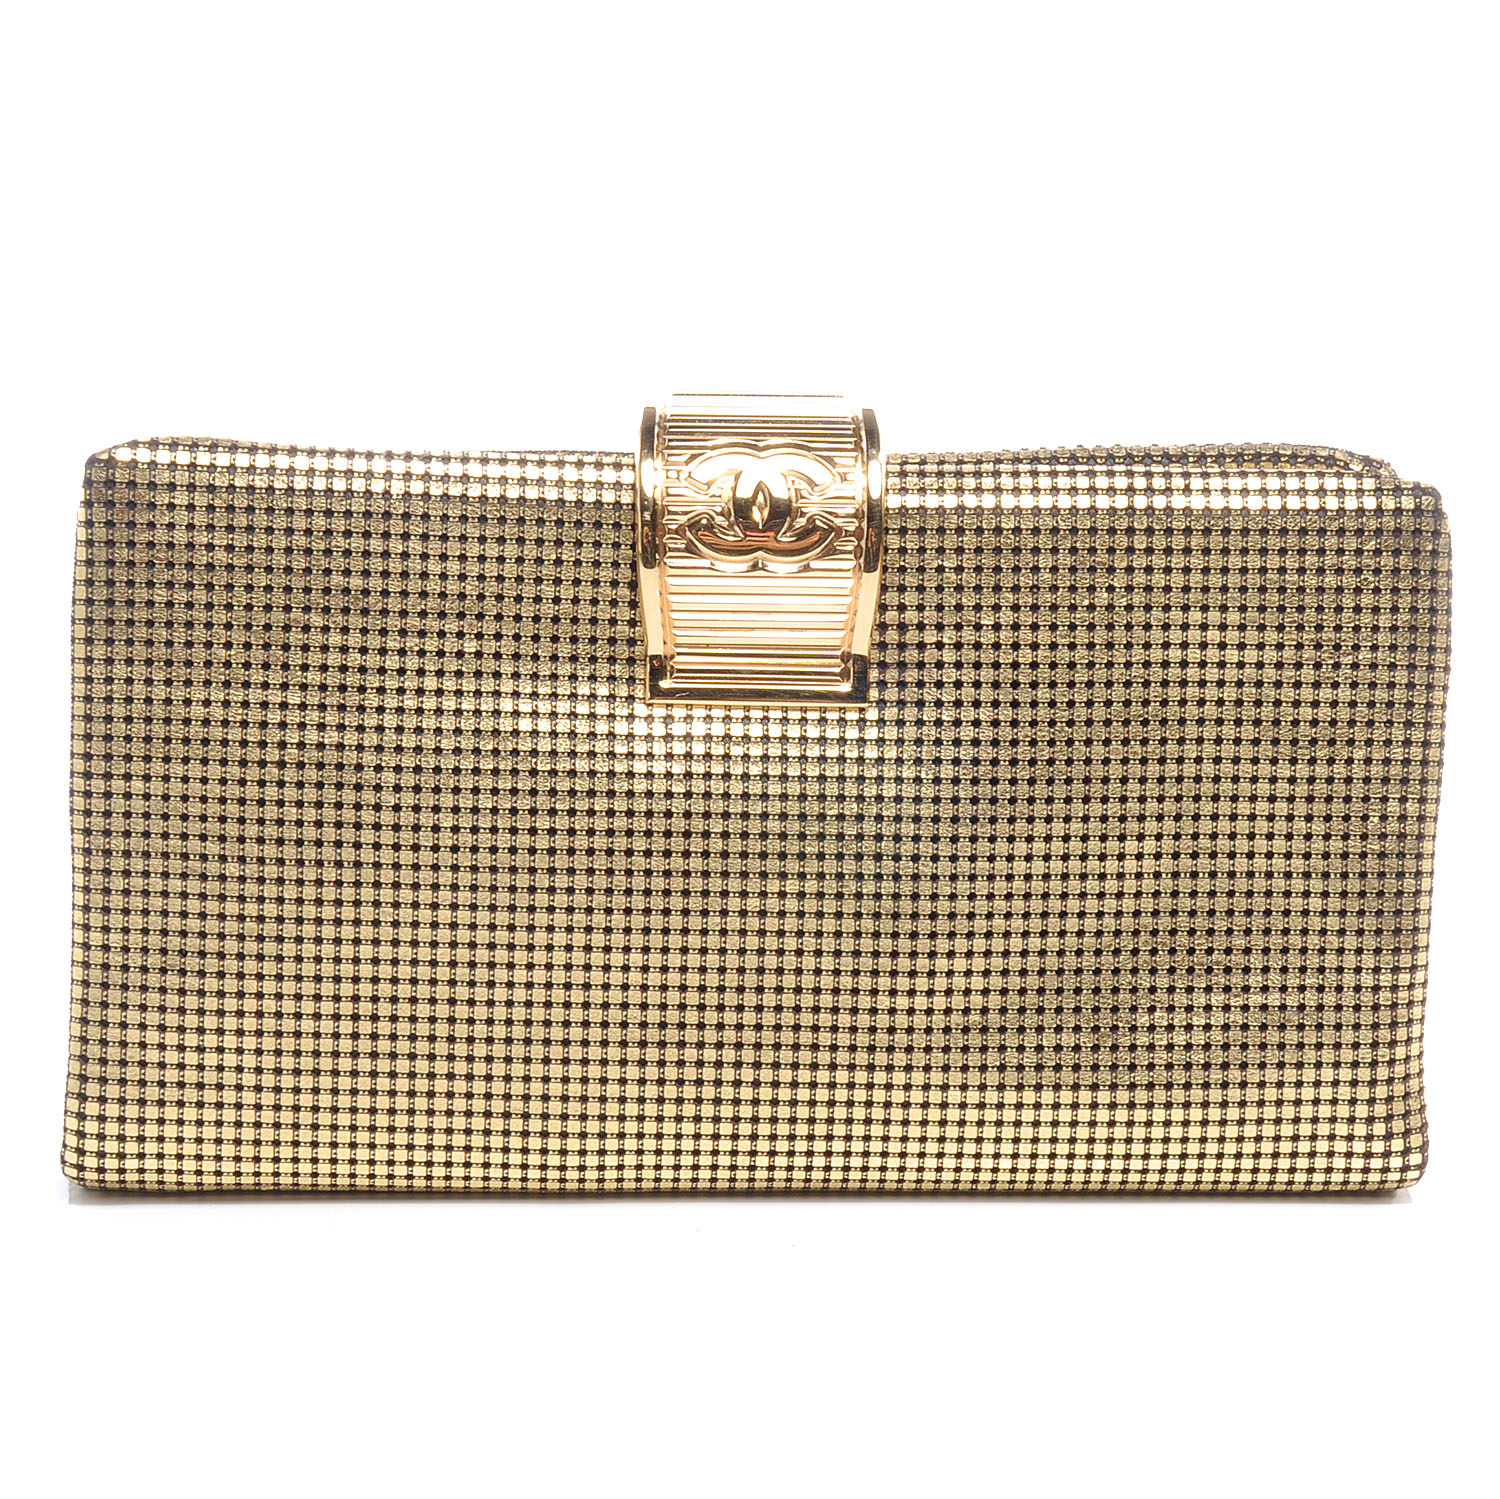 CHANEL Leather Perforated Mesh CC Clutch Metallic Gold 55930